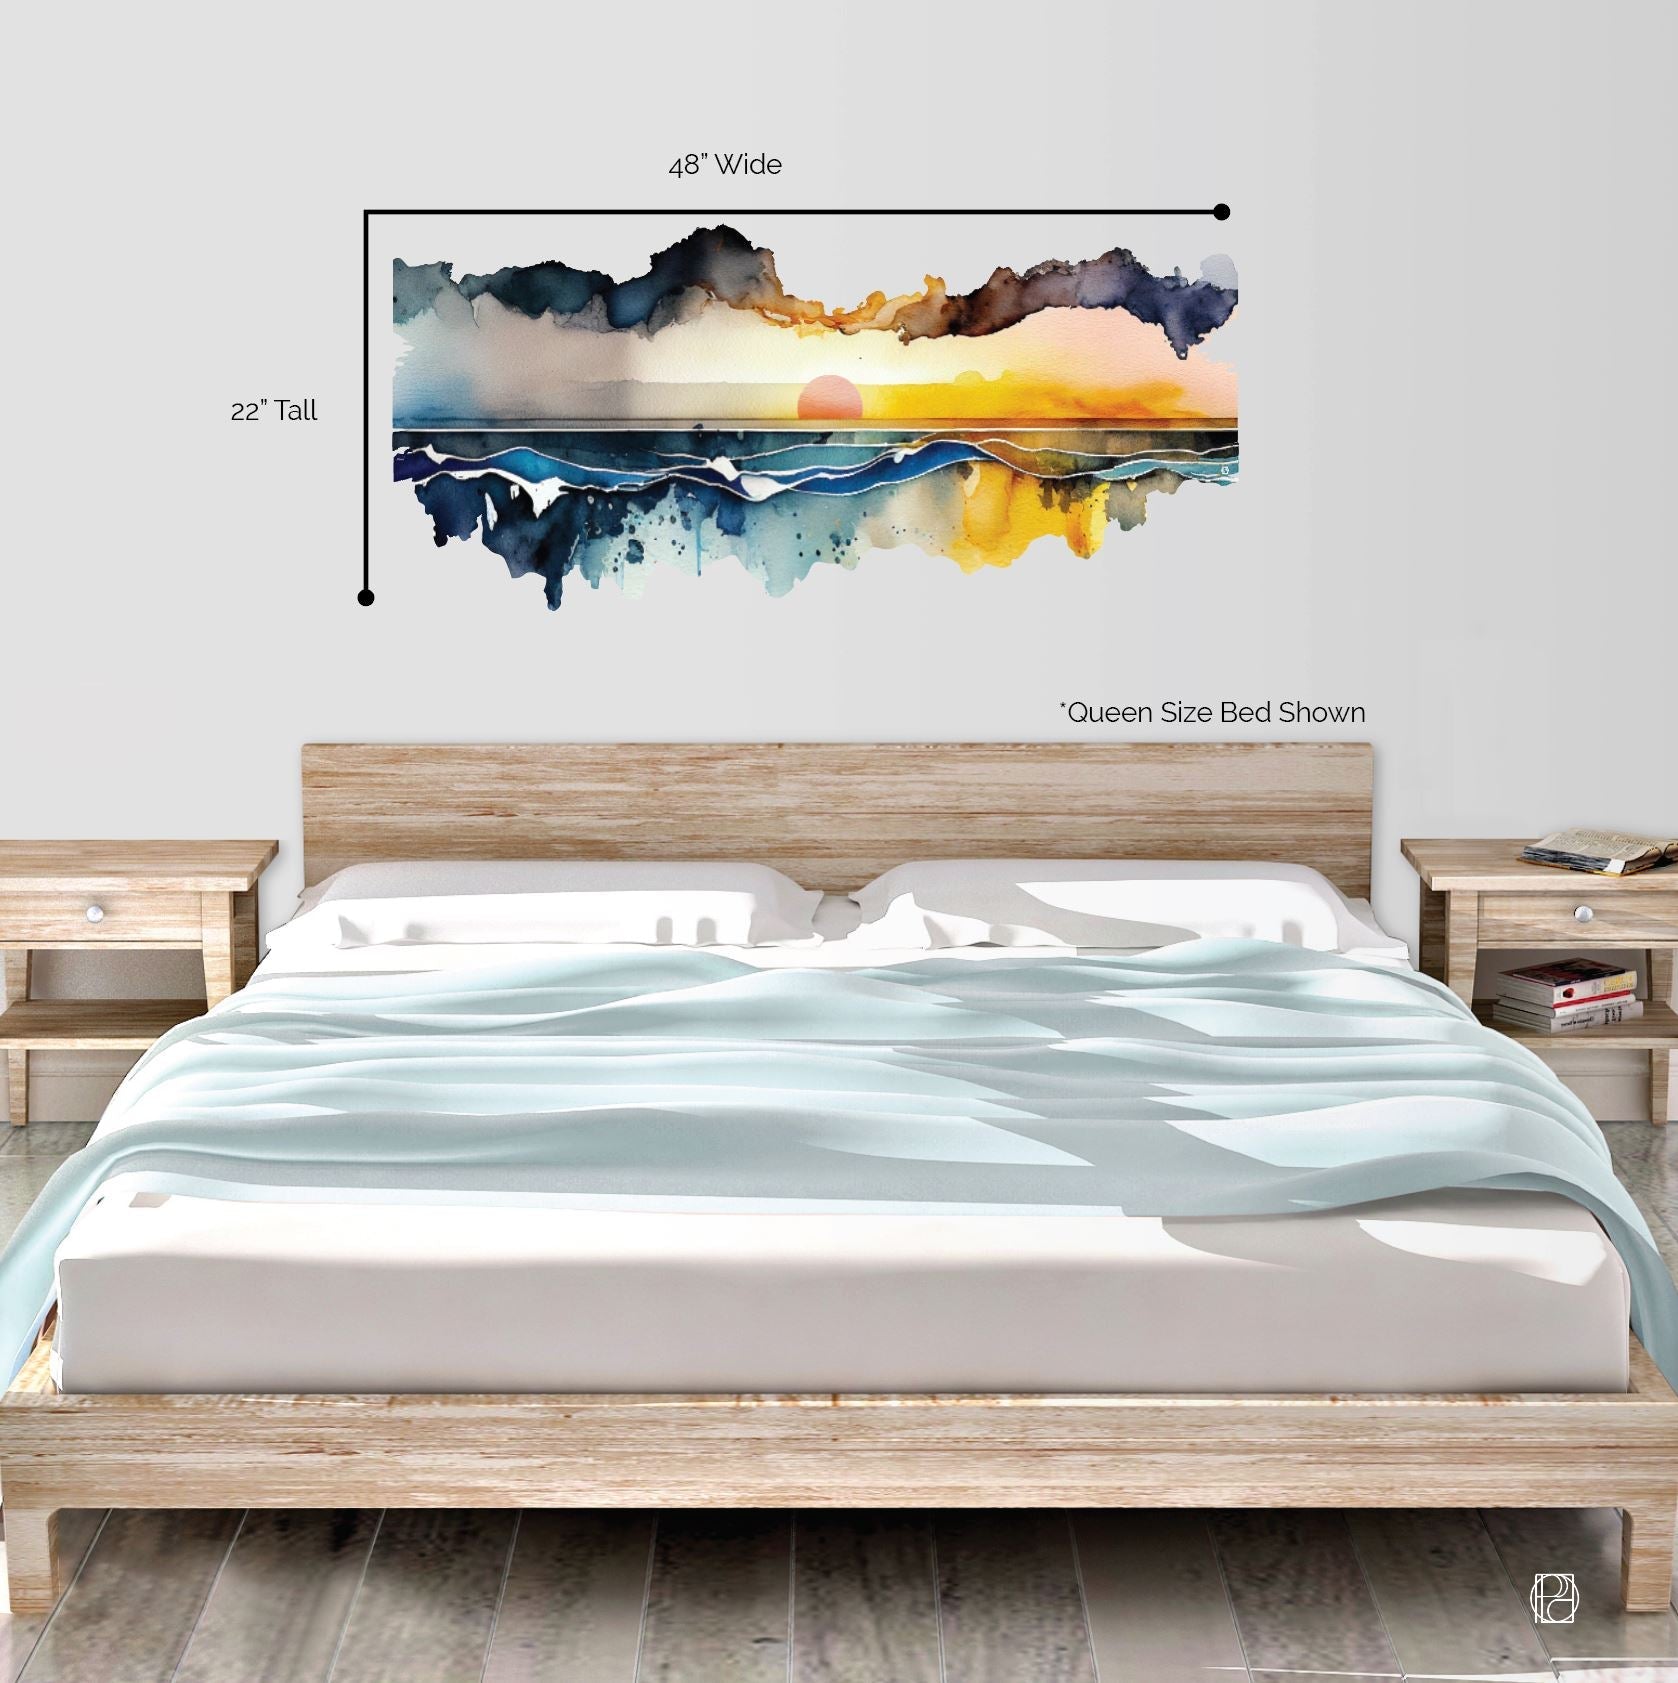 Ocean Sunset Wall Decal | Watercolor Surf Wall Art Sticker - Picture Perfect Decals